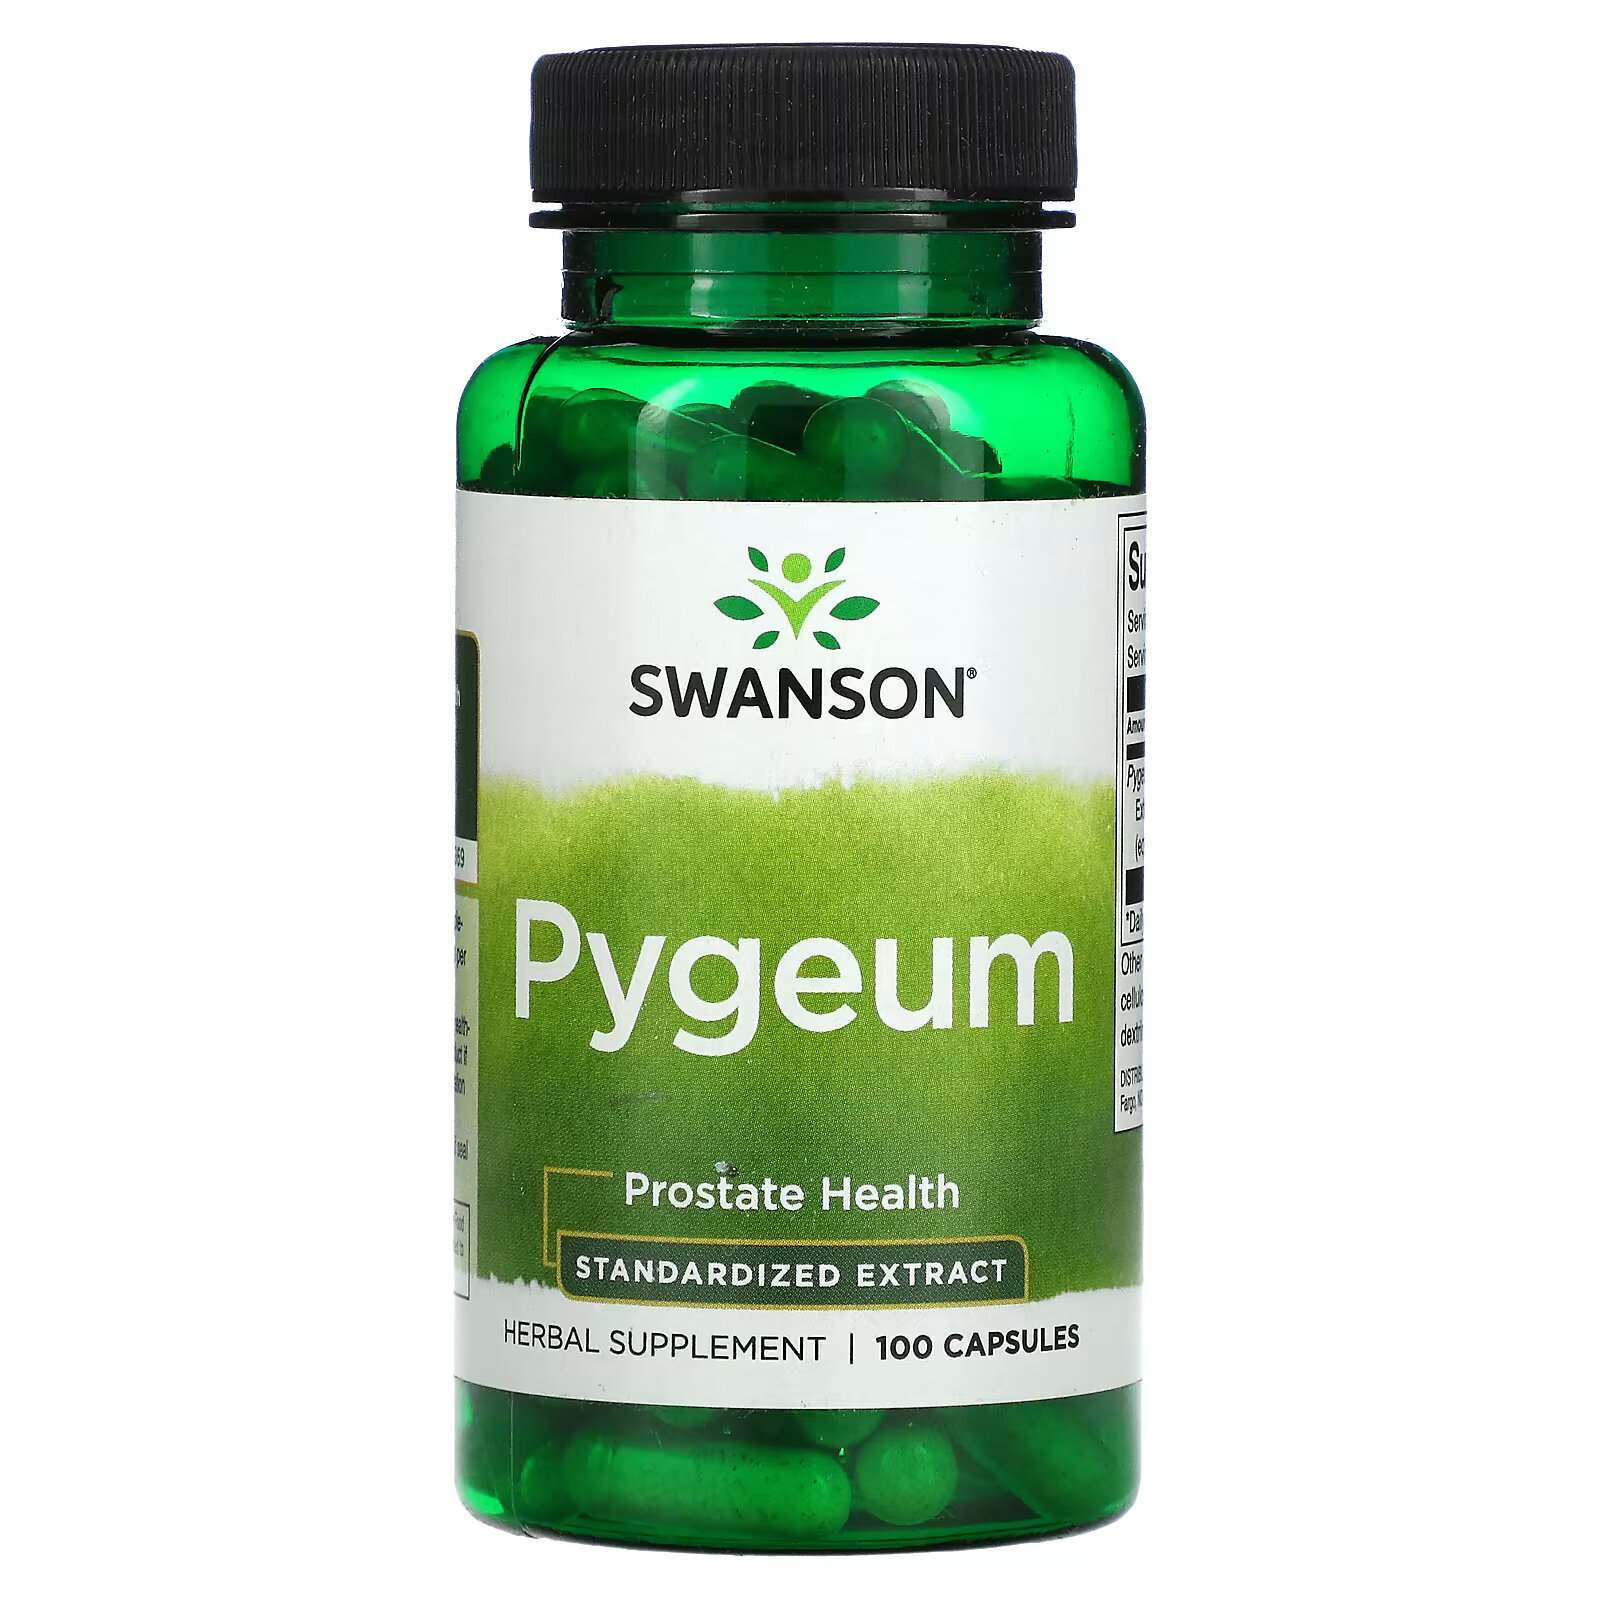 swanson pygeum prostate health 100 capsules Swanson, Pygeum, 100 капсул